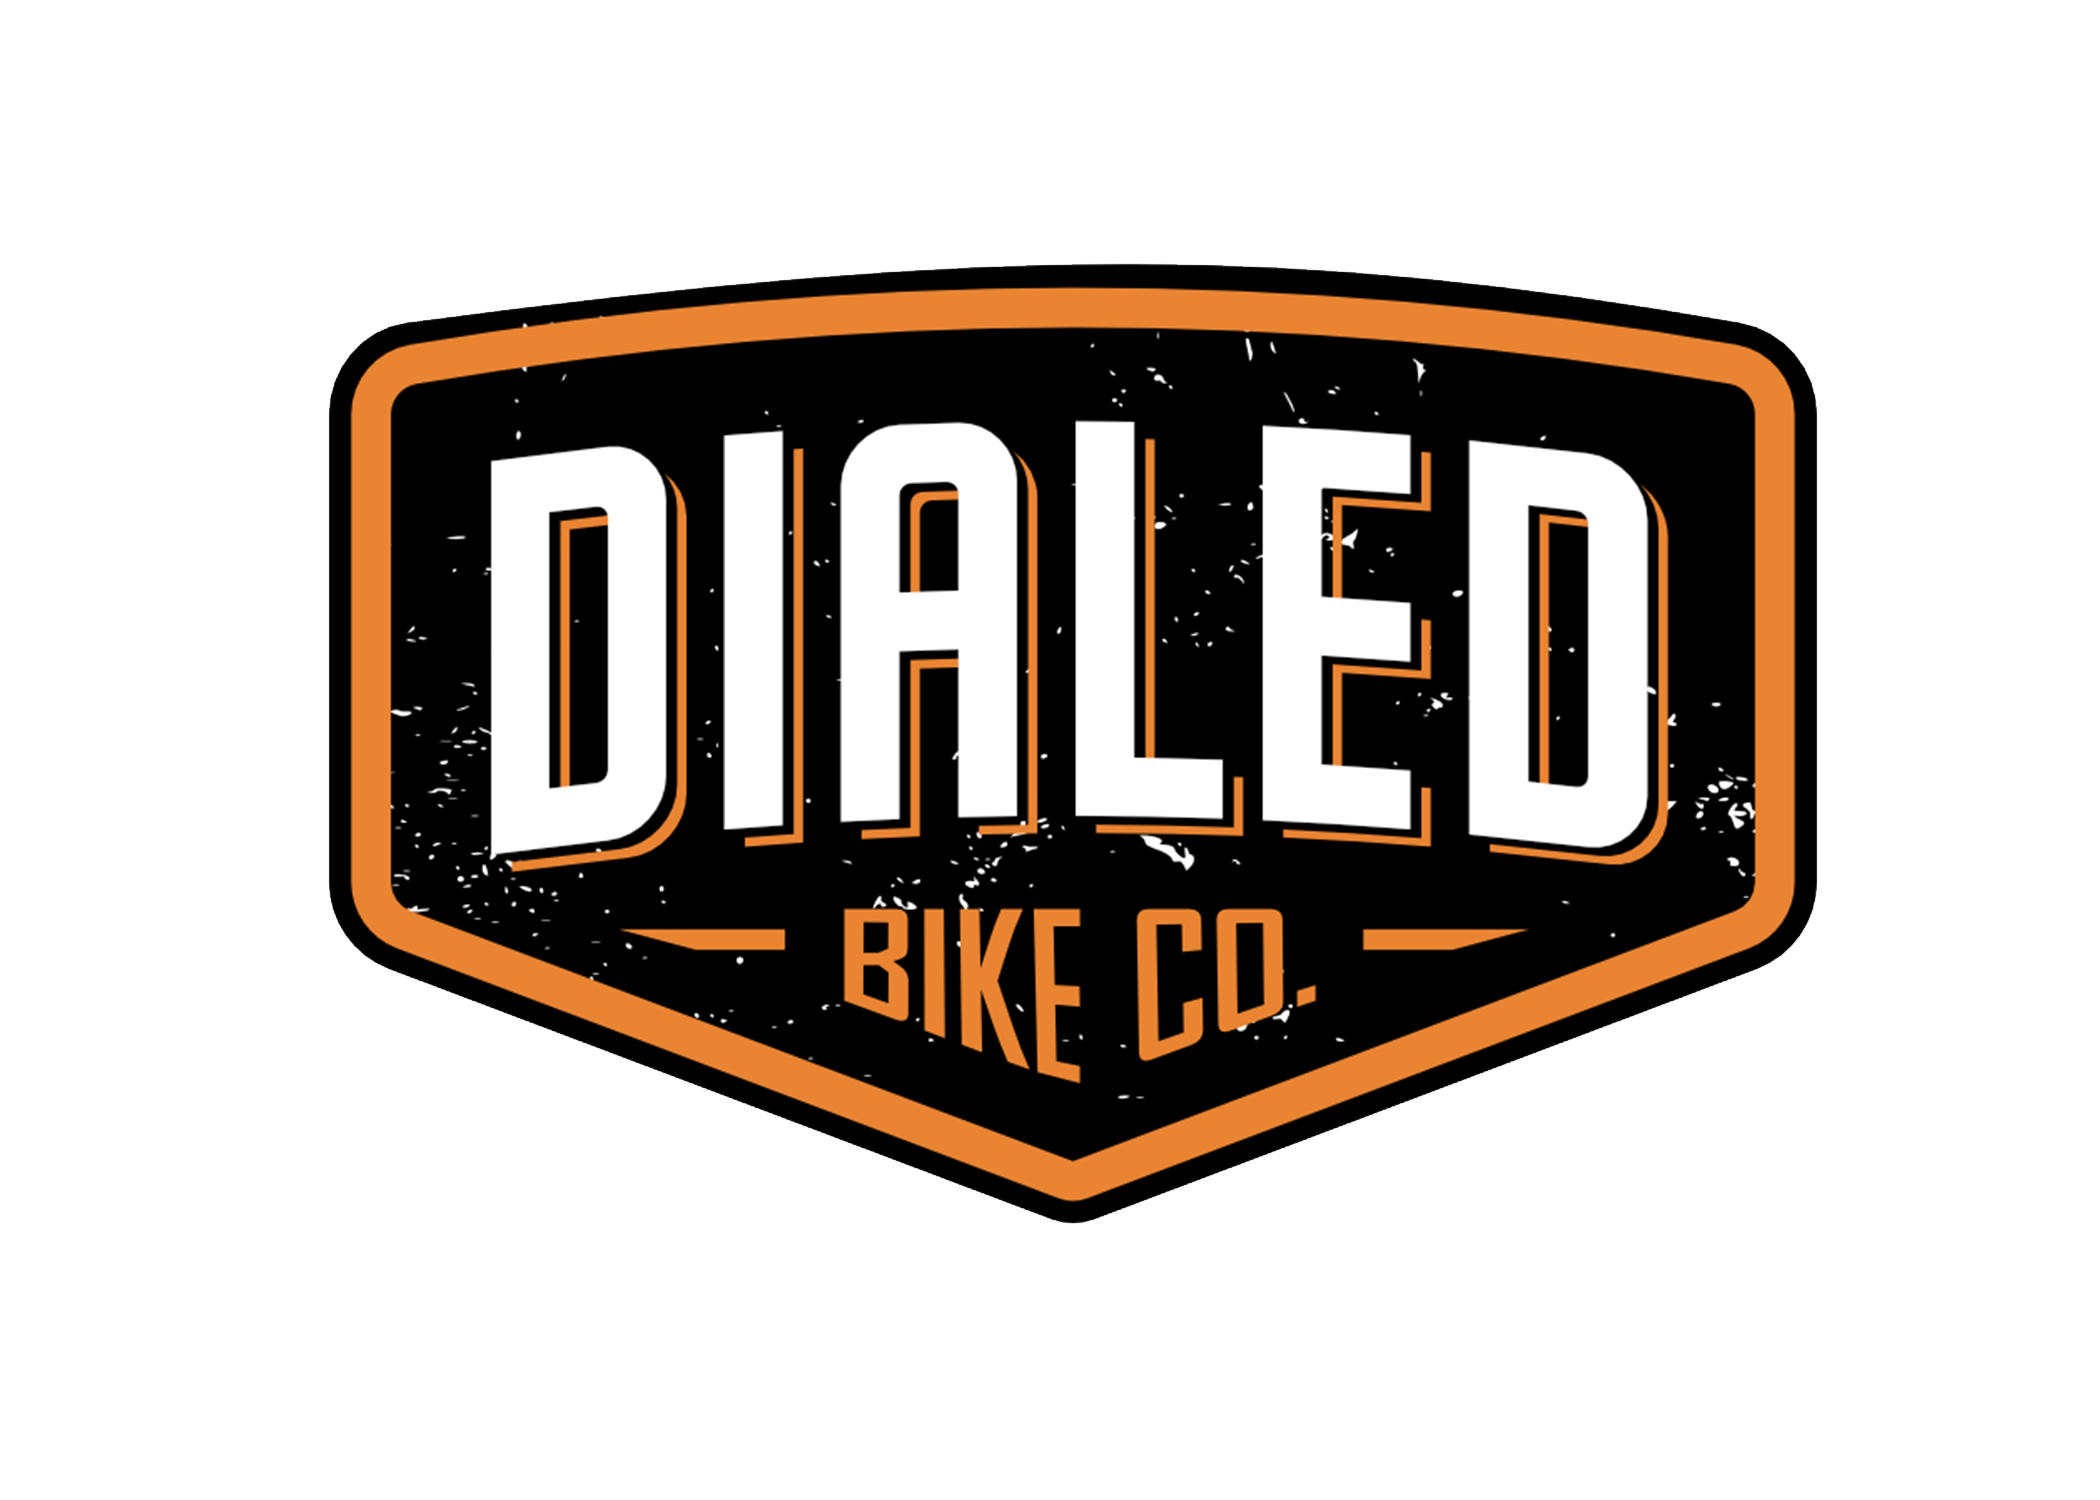 Bike Shop and Mobile Repair Service. Specializing in Mountain Bikes, Service, Parts, Accessories and Apparel.